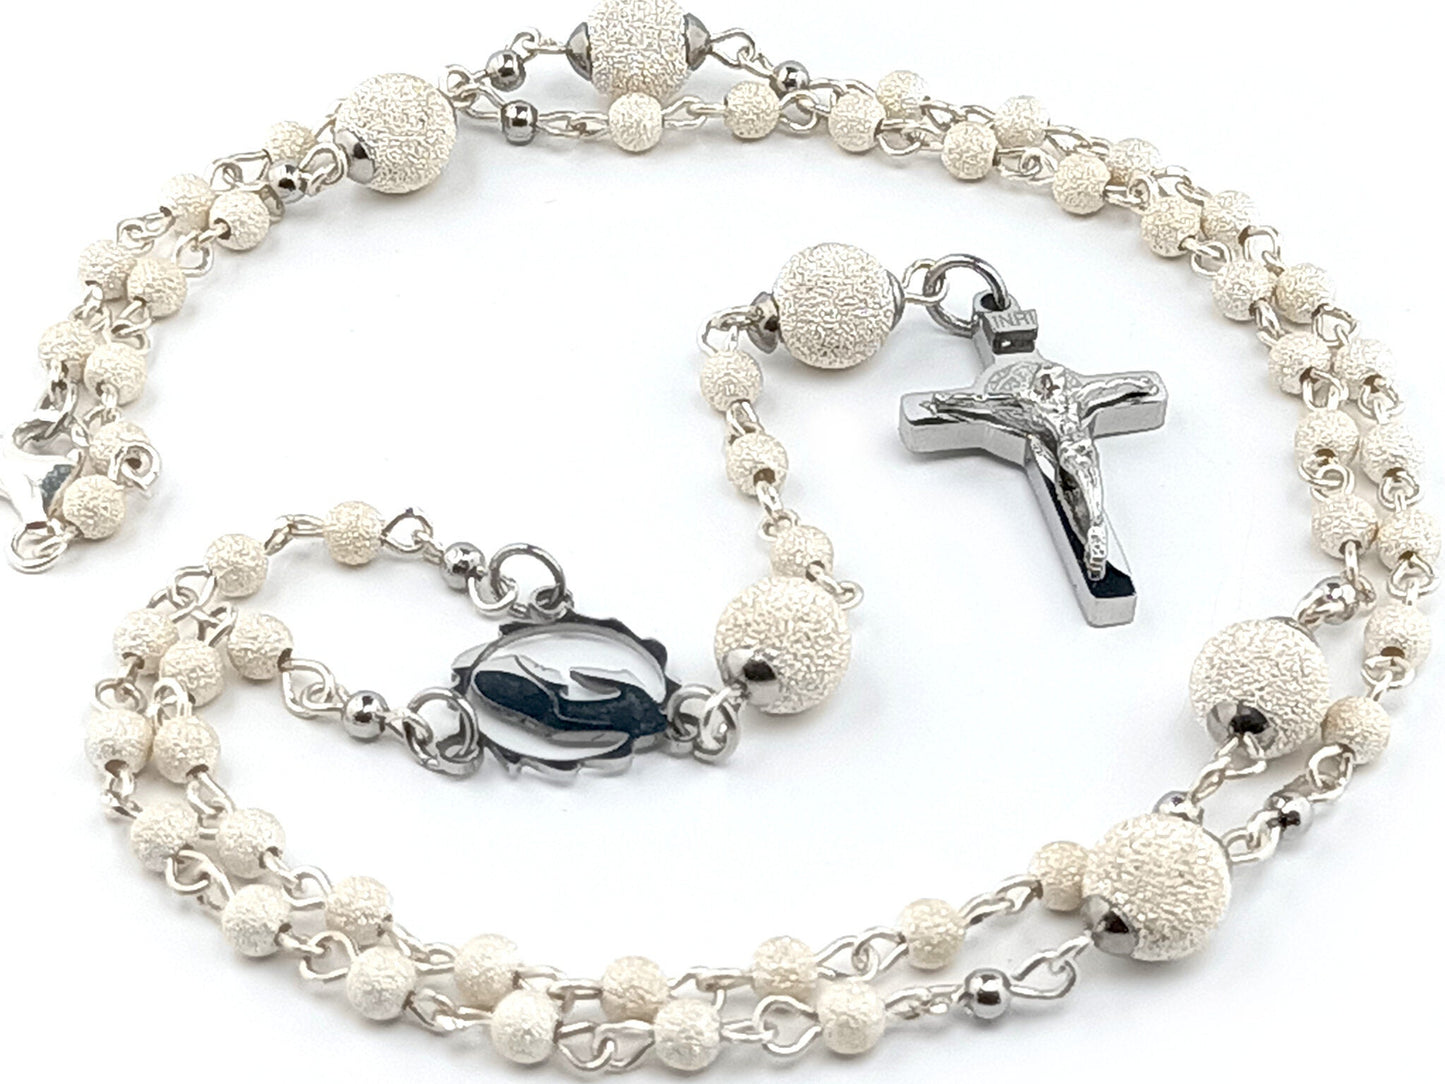 Virgin Mary unique rosary beads 925 sterling silver rosary necklace with stainless steel centre medal and crucifix.